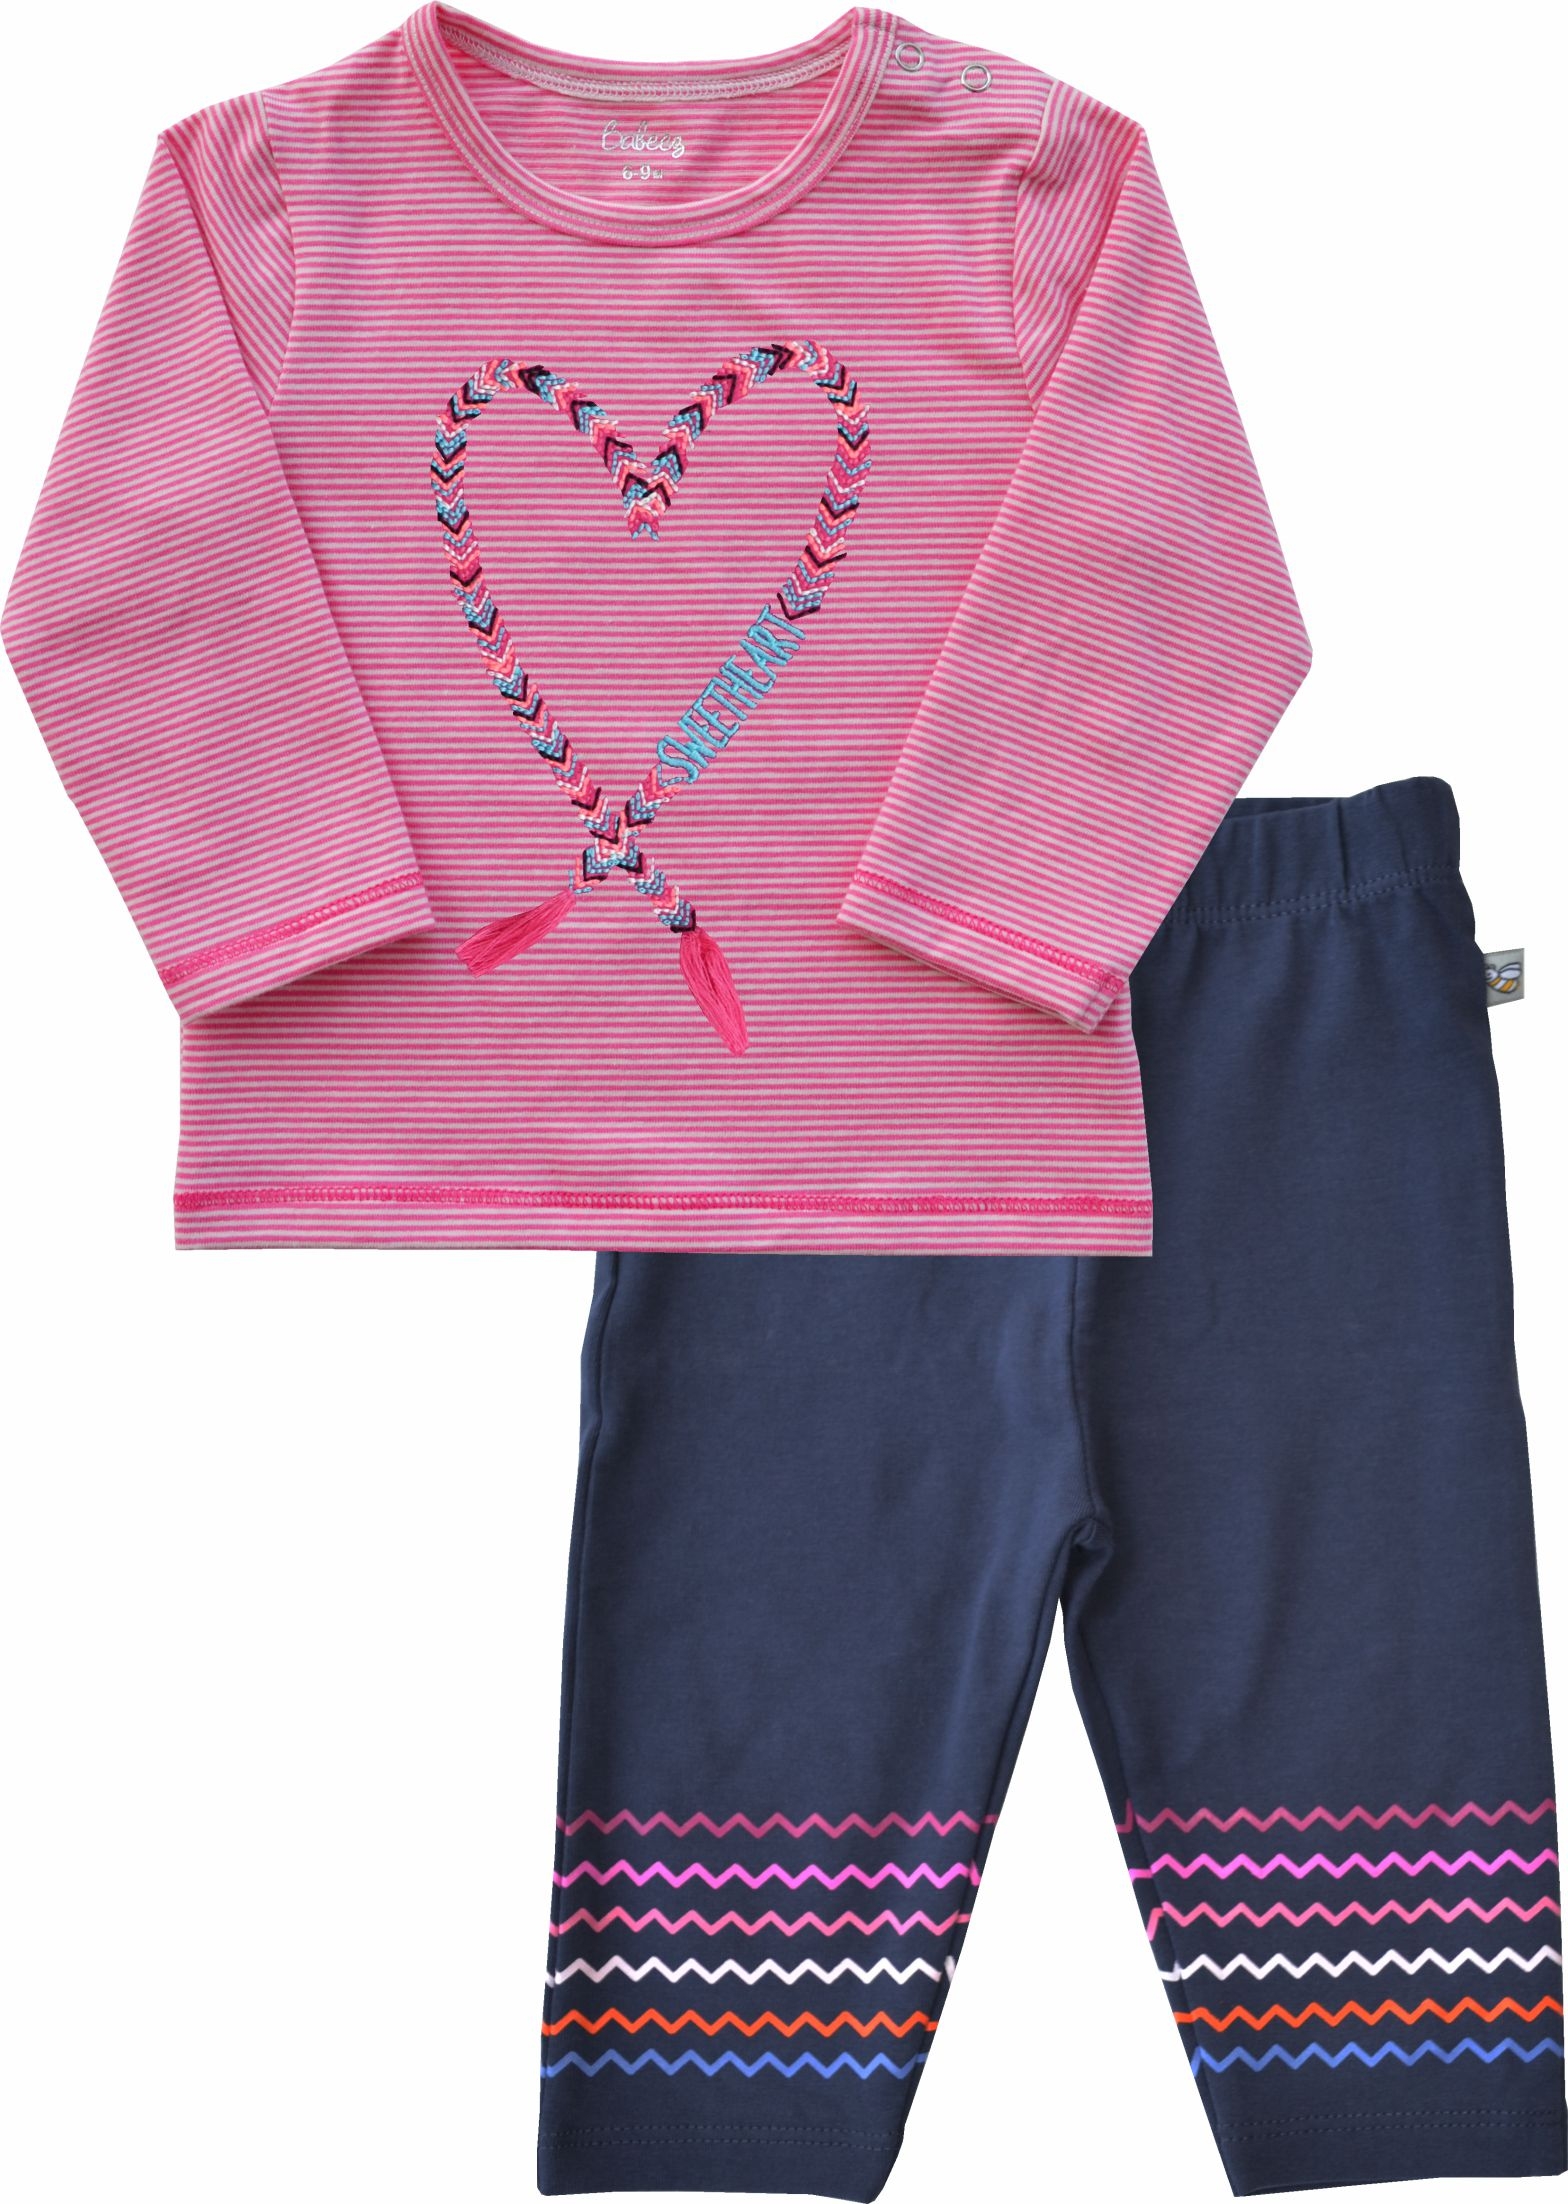 Heart Embroidery on Pink Stripes Long sleeve Top + Navy Printed Legging (95% Cotton 5% Elasthan Jersey)